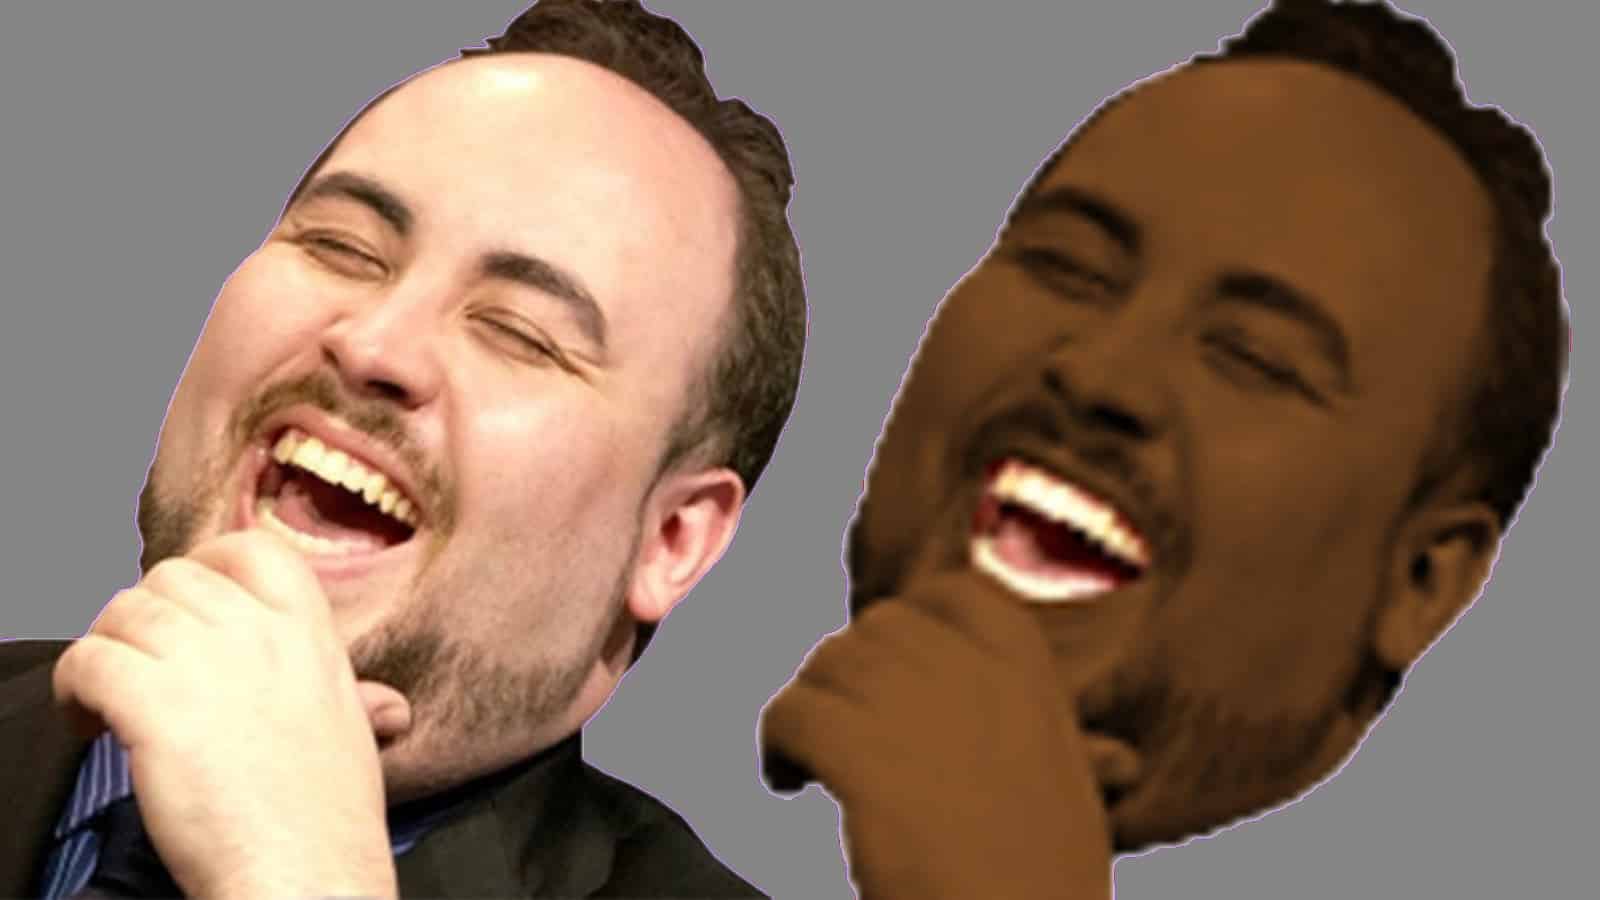 ZULUL and LUL emote